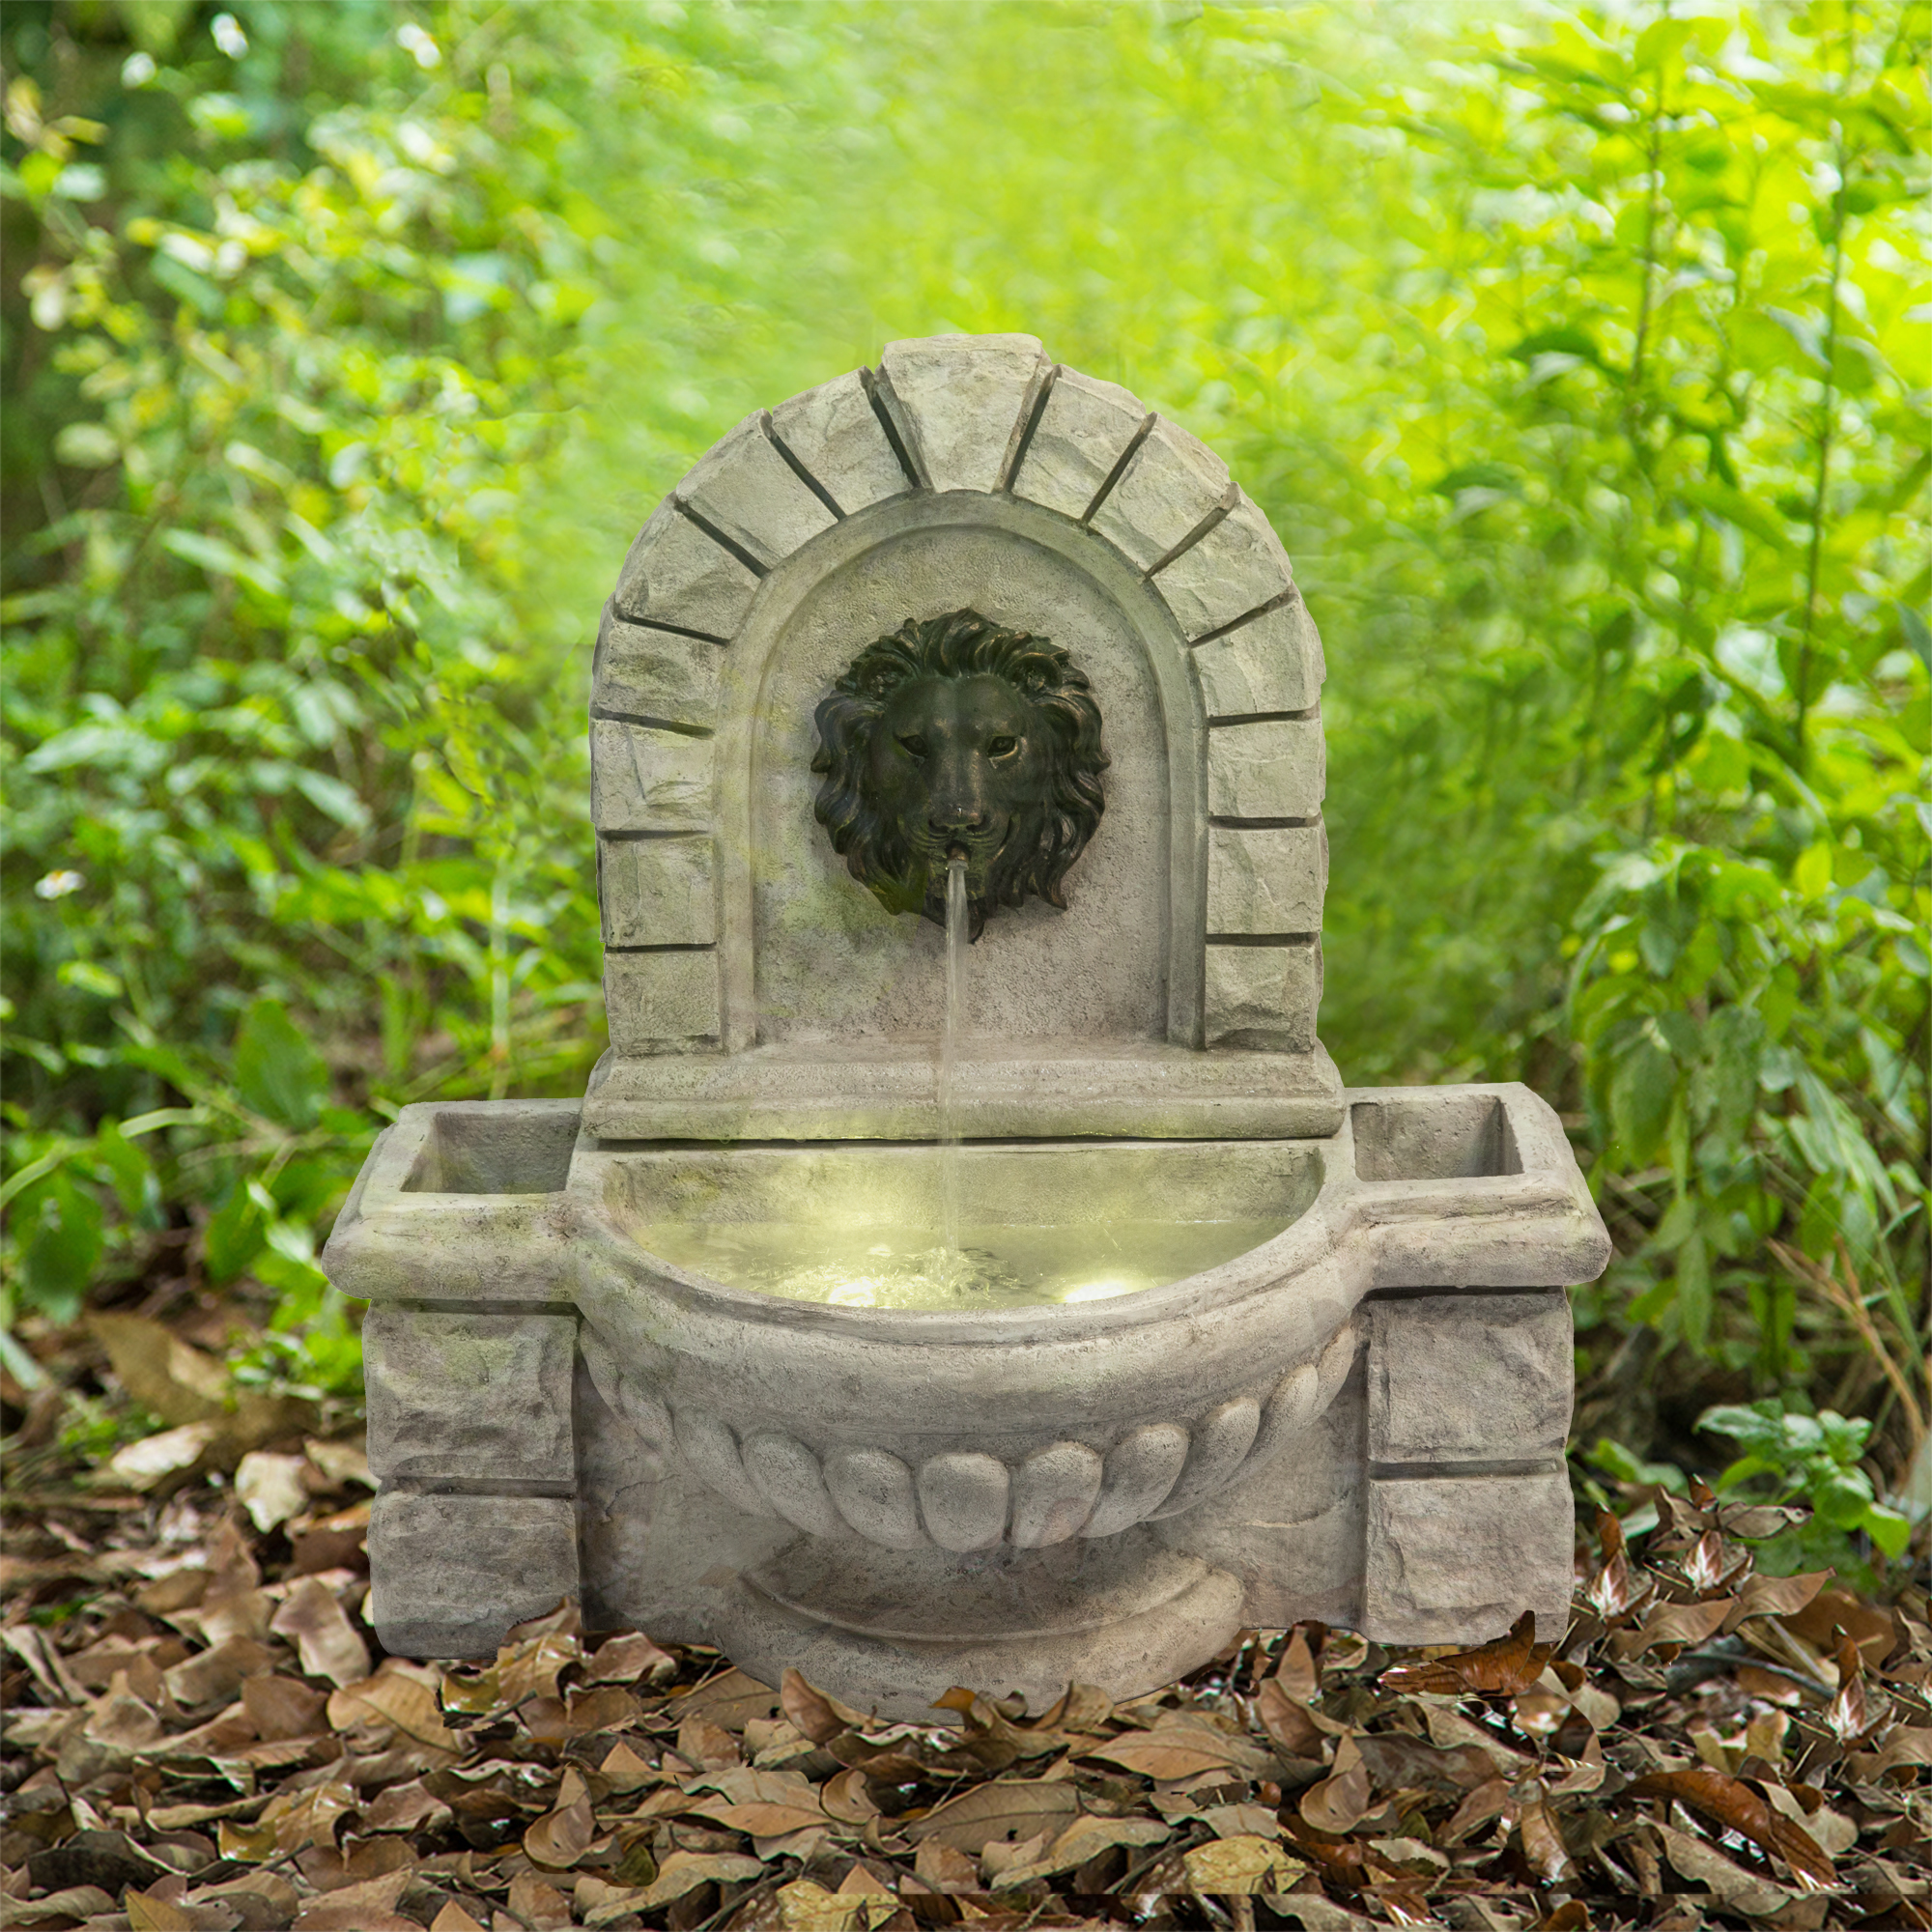 Teamson Home Water Fountain & Planters Indoor Garden Charcoal With Light VFD8431 - image 3 of 5